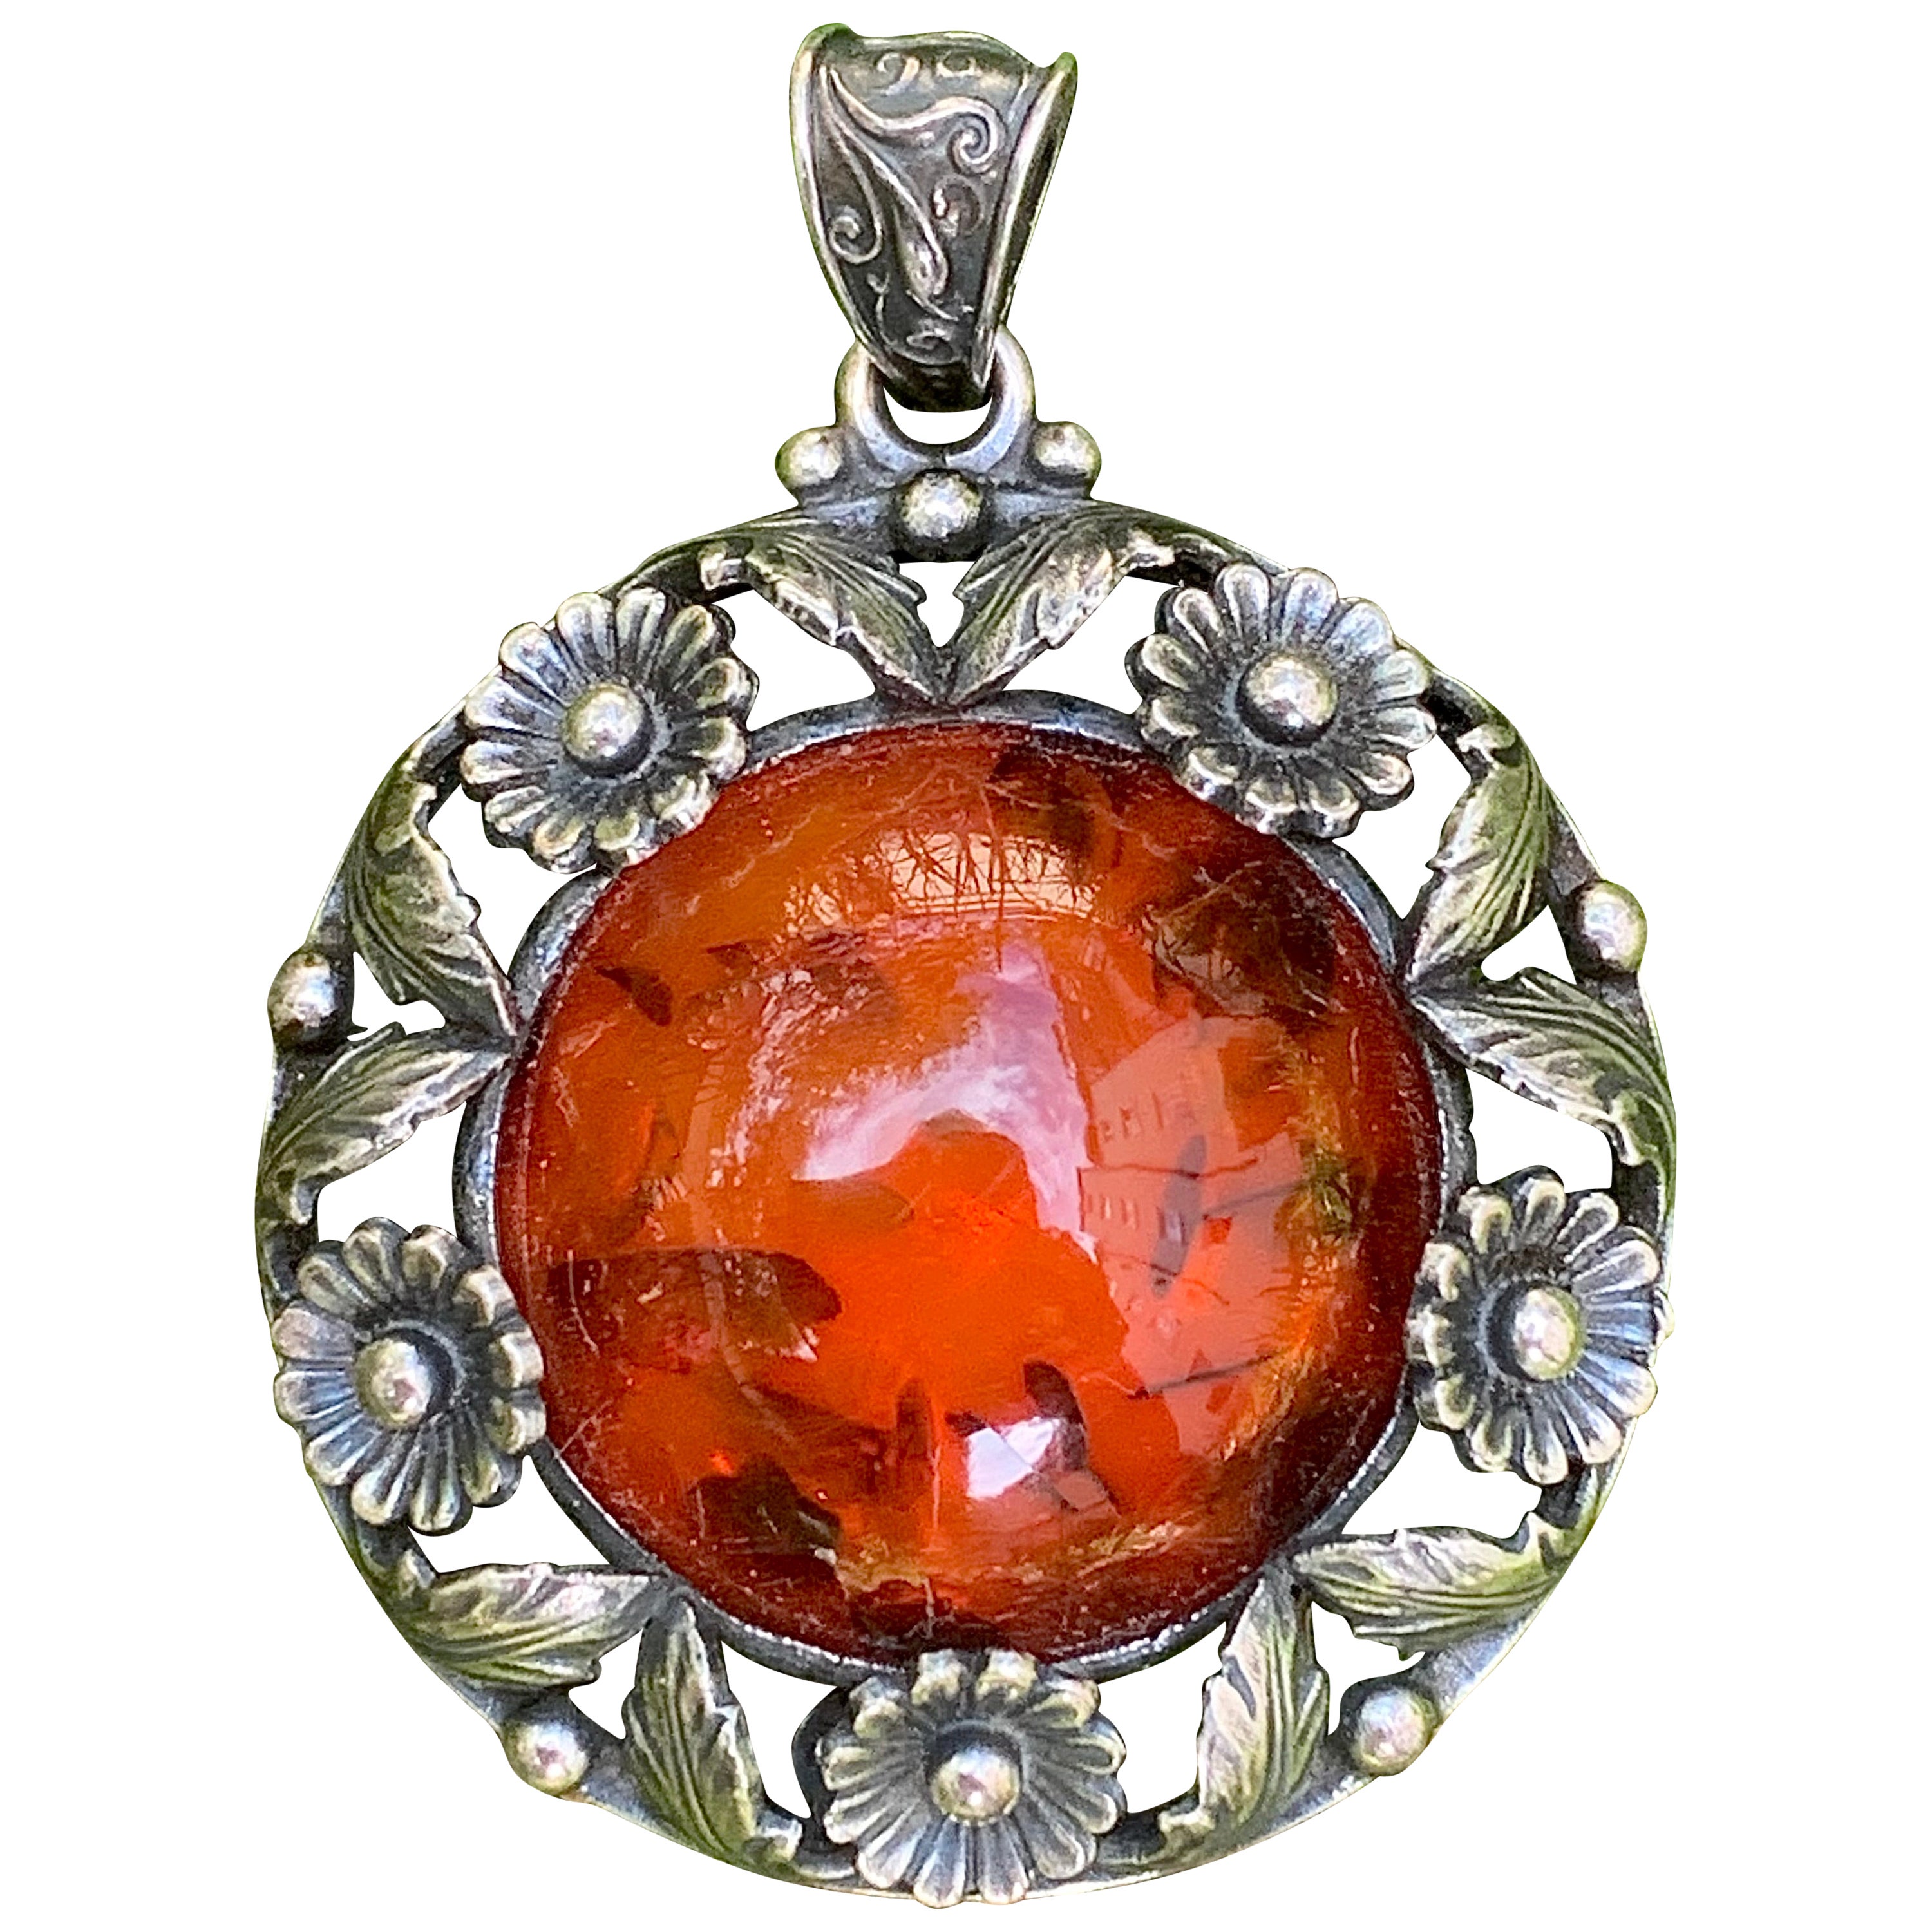 N.E. From Signed Sterling Silver Pendant Amber Cabochon Danish Silver Jewellery 